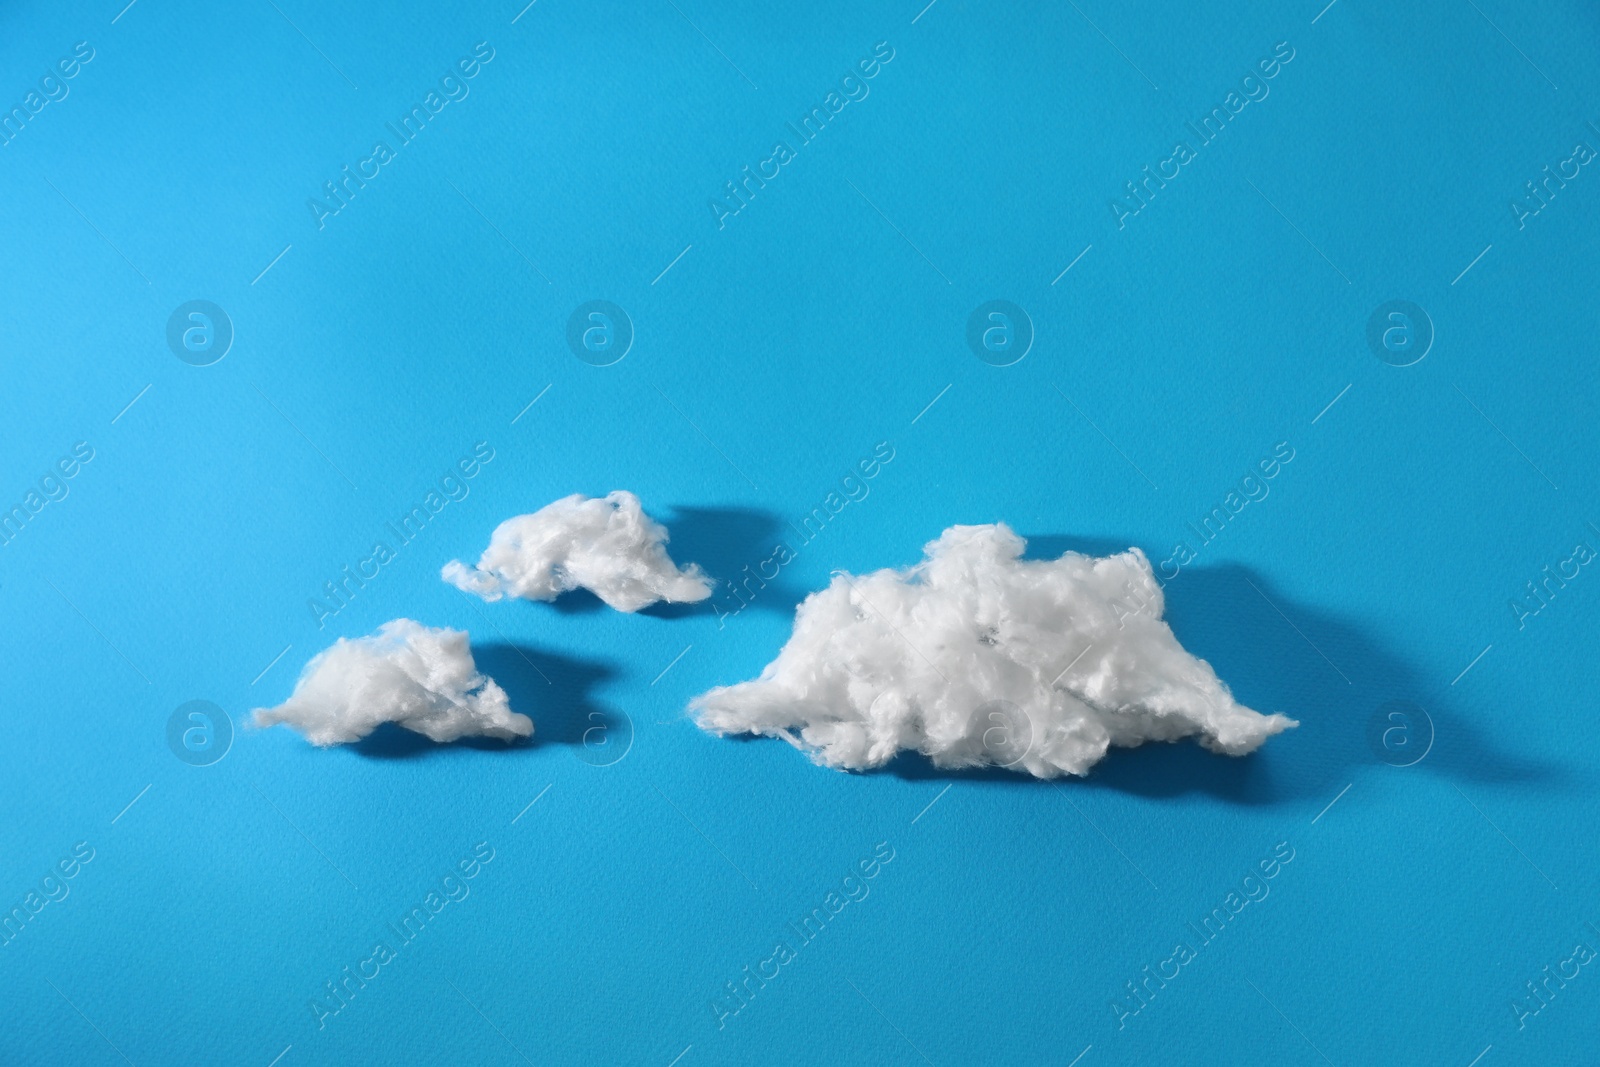 Photo of Clouds made of cotton on blue background. Space for text